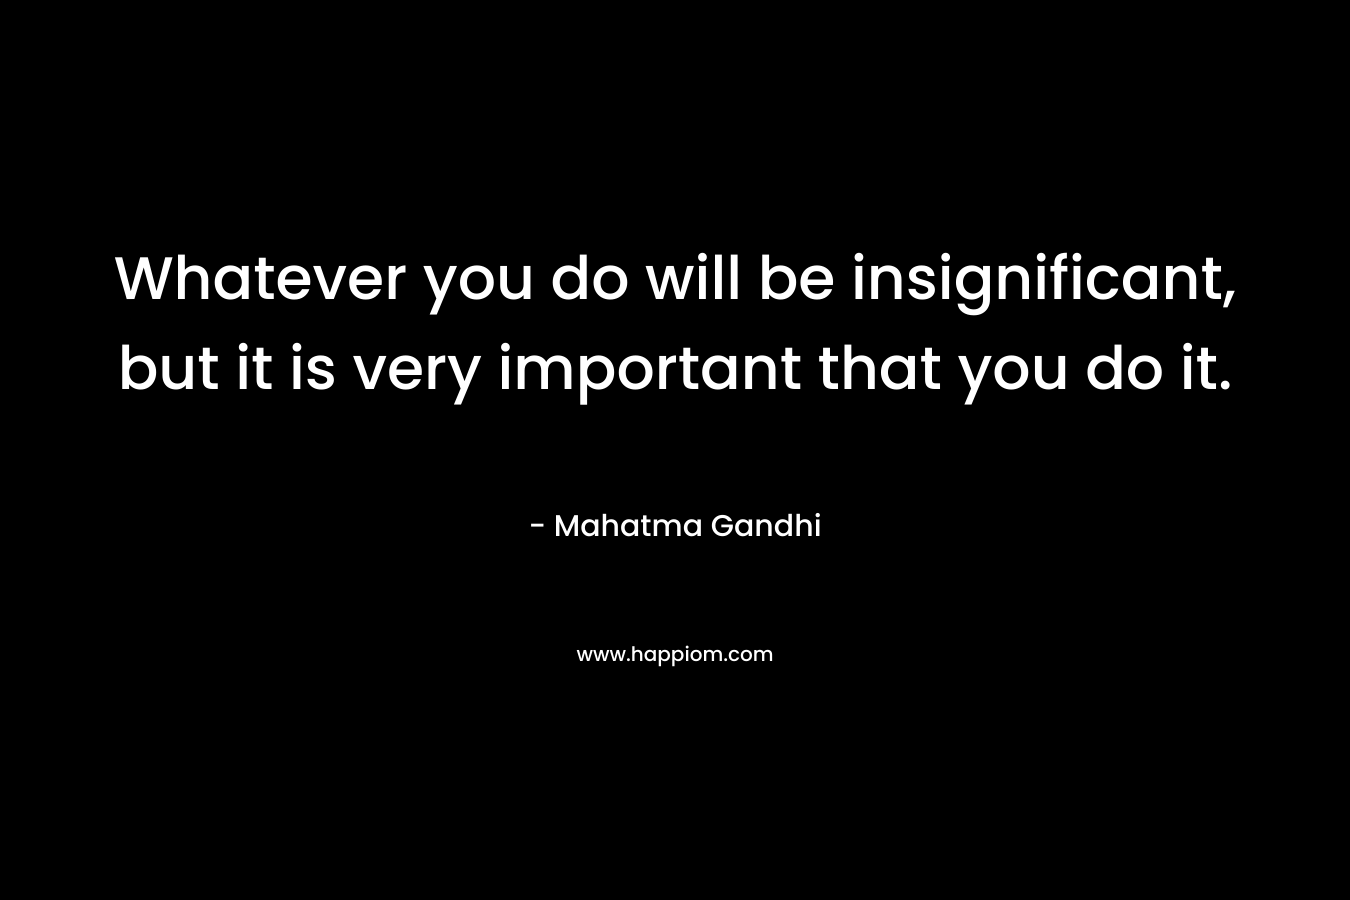 Whatever you do will be insignificant, but it is very important that you do it.